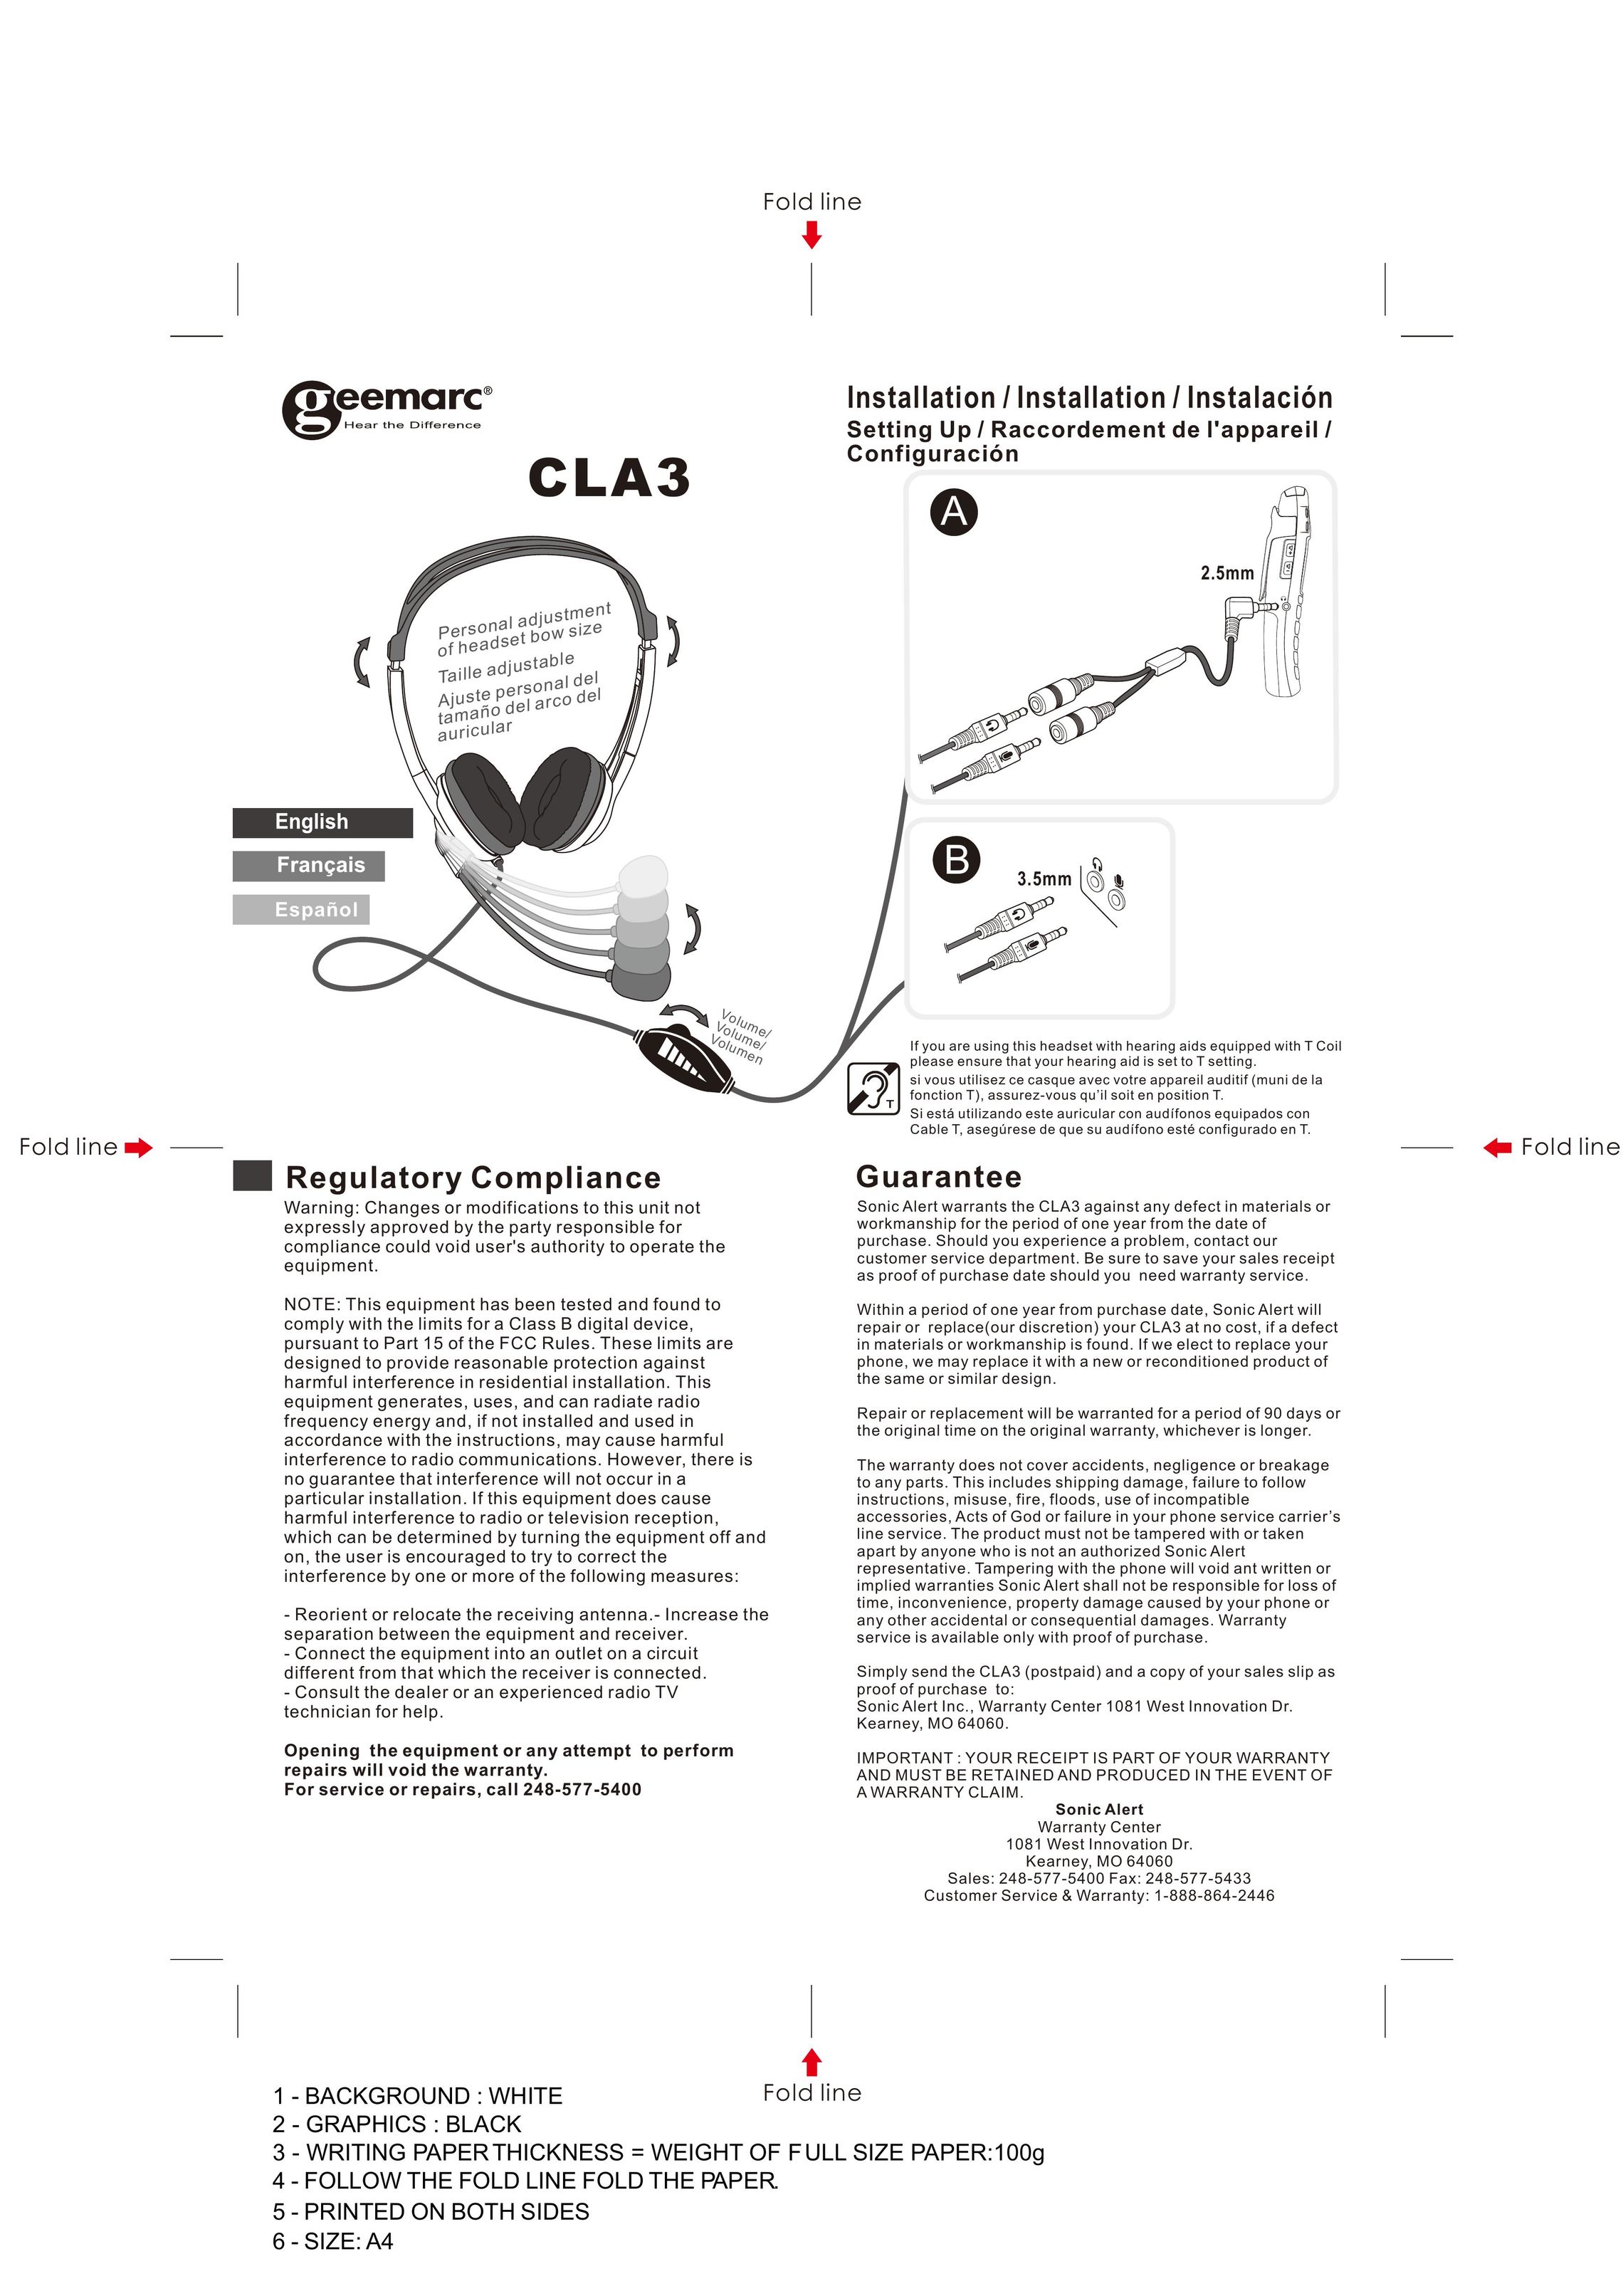 Geemarc CLA3 Corded Headset User Manual (Page 1)